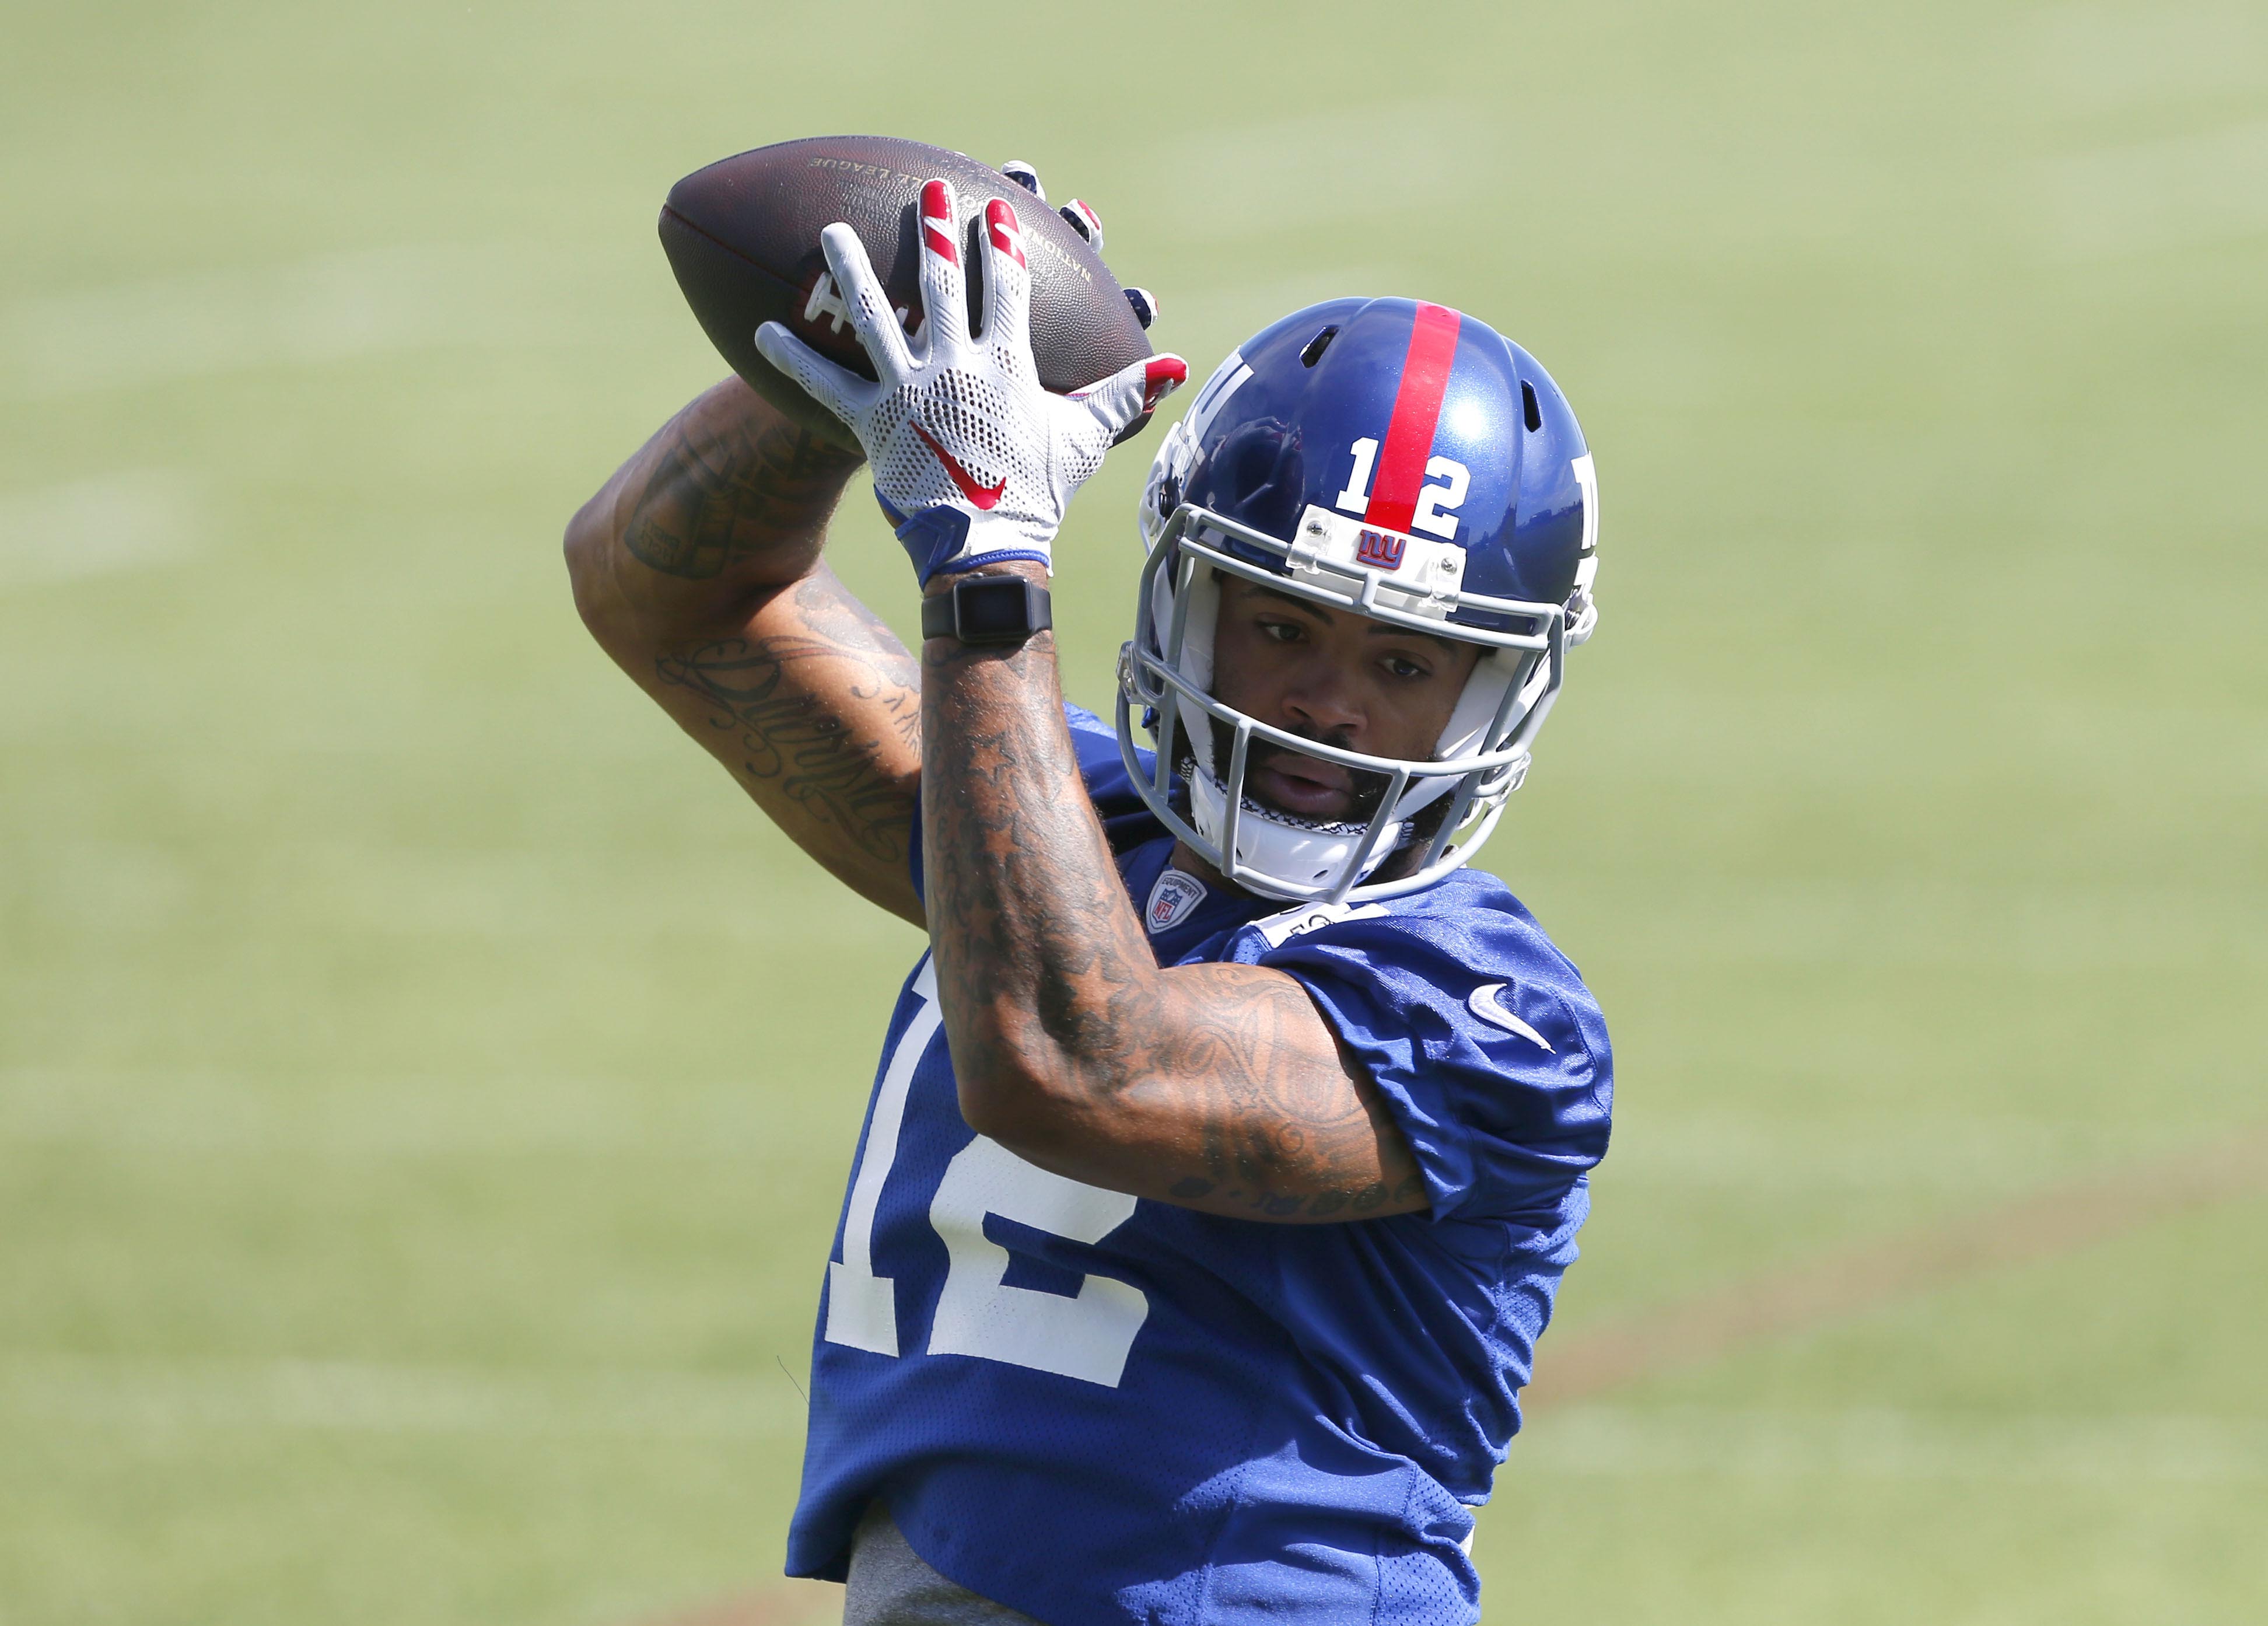 New York Giants Slot Receiver engineeringclever